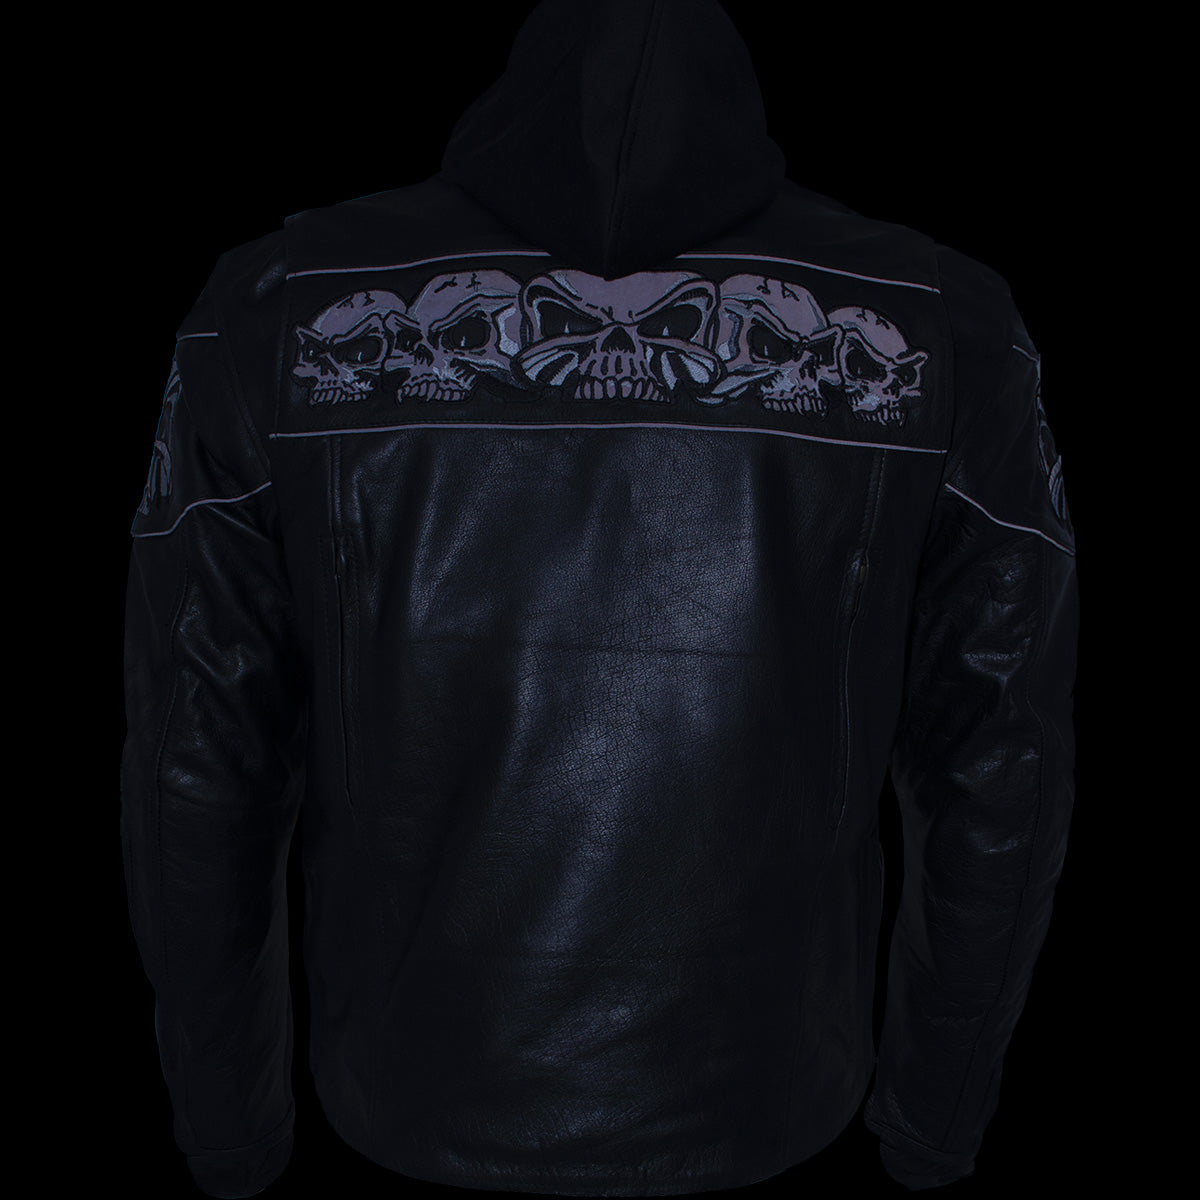 Xelement XS1504 Men's ‘Futile’ Black Leather CE Armored Motorcycle Hooded Jacket with Reflective Skulls